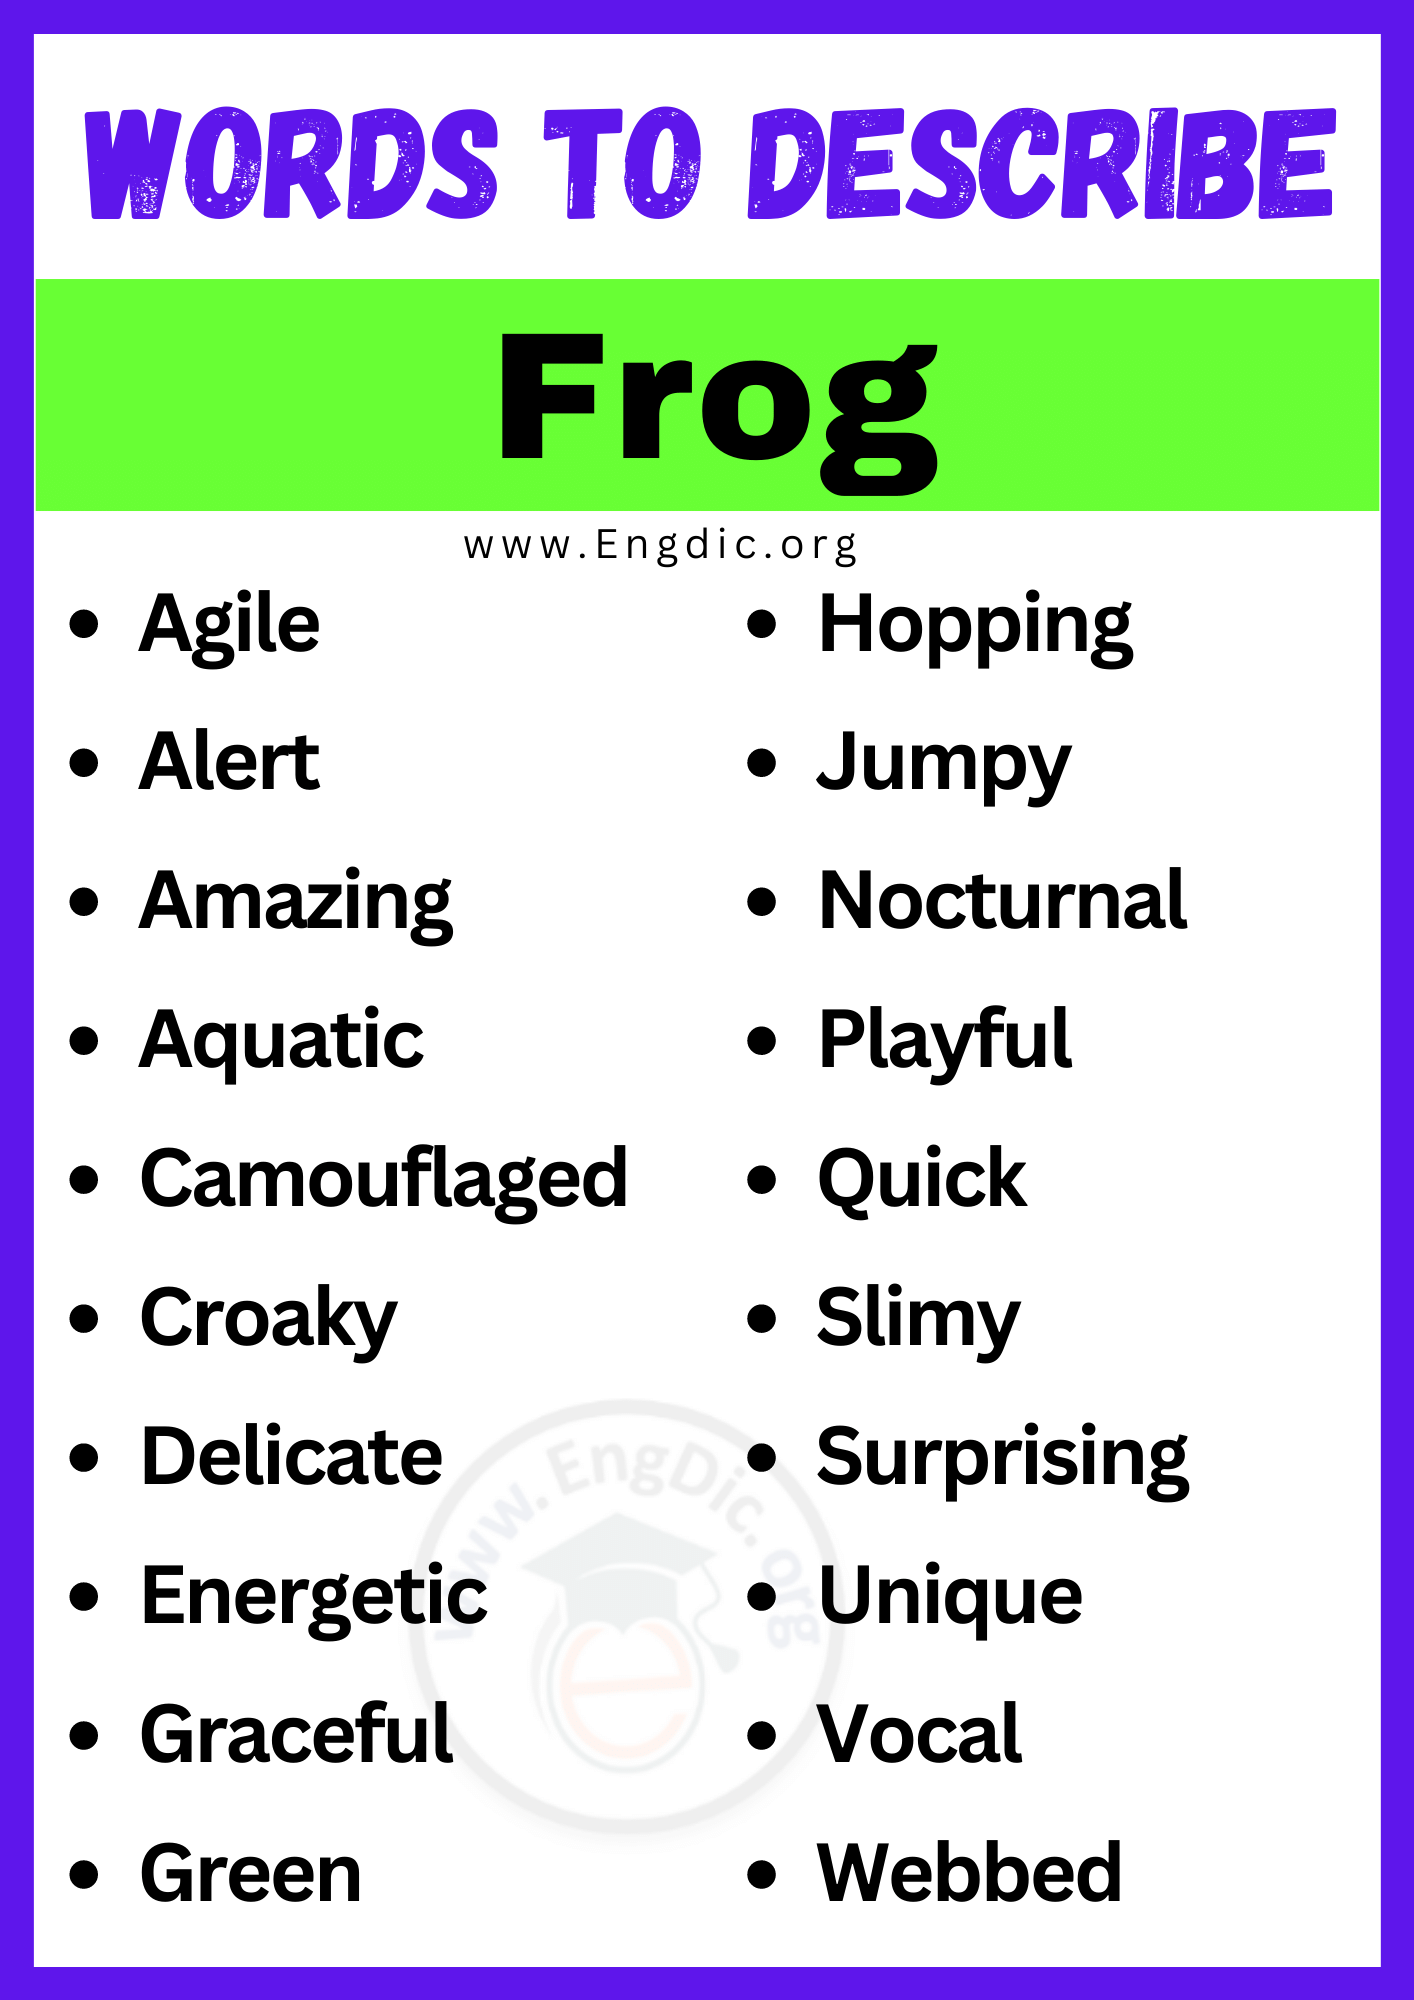 Words to Describe Frog